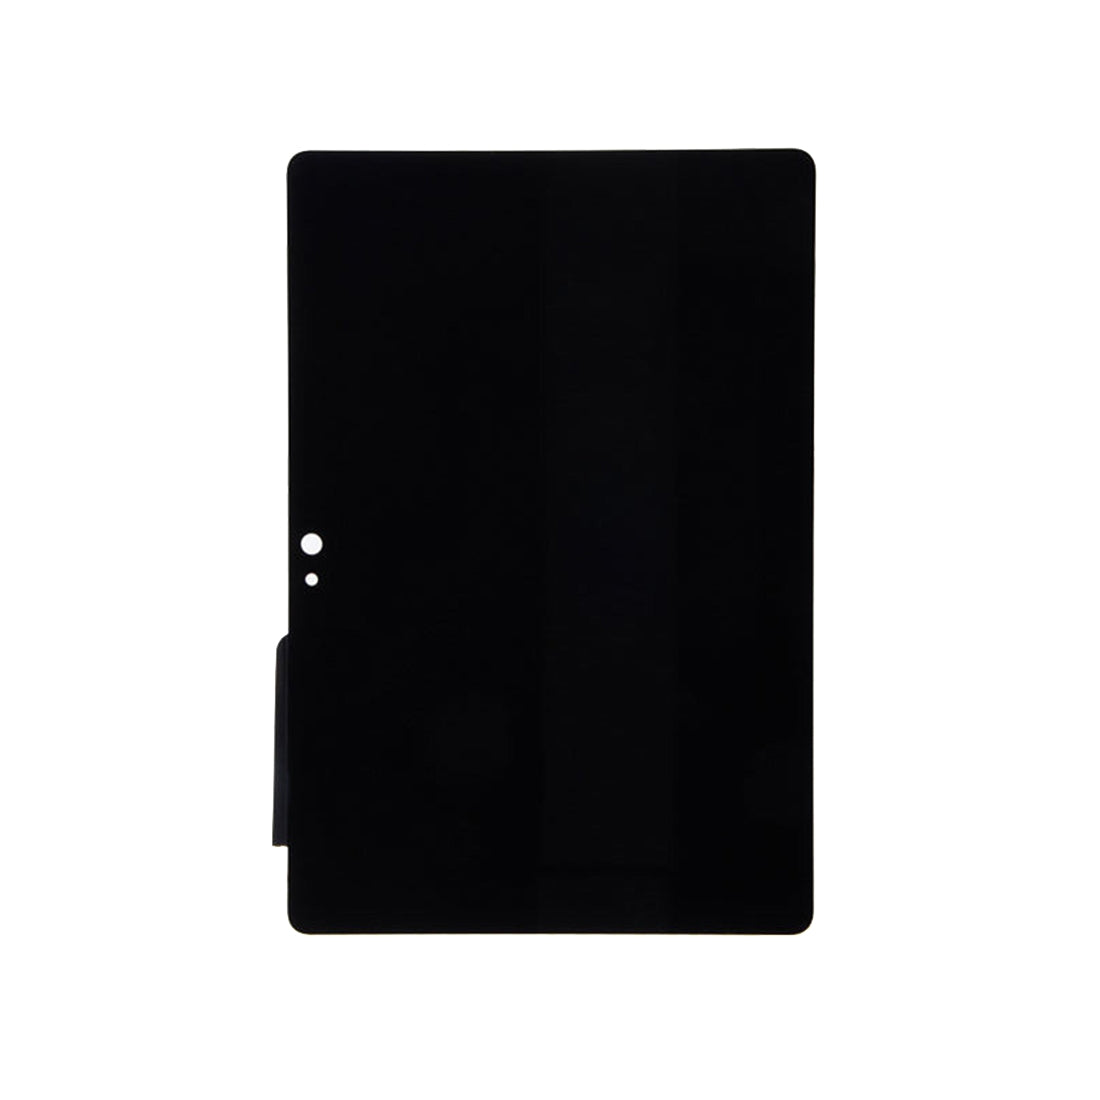 LCD Screen + Touch Digitizer Amazon Kindle Fire HDX 7 Black